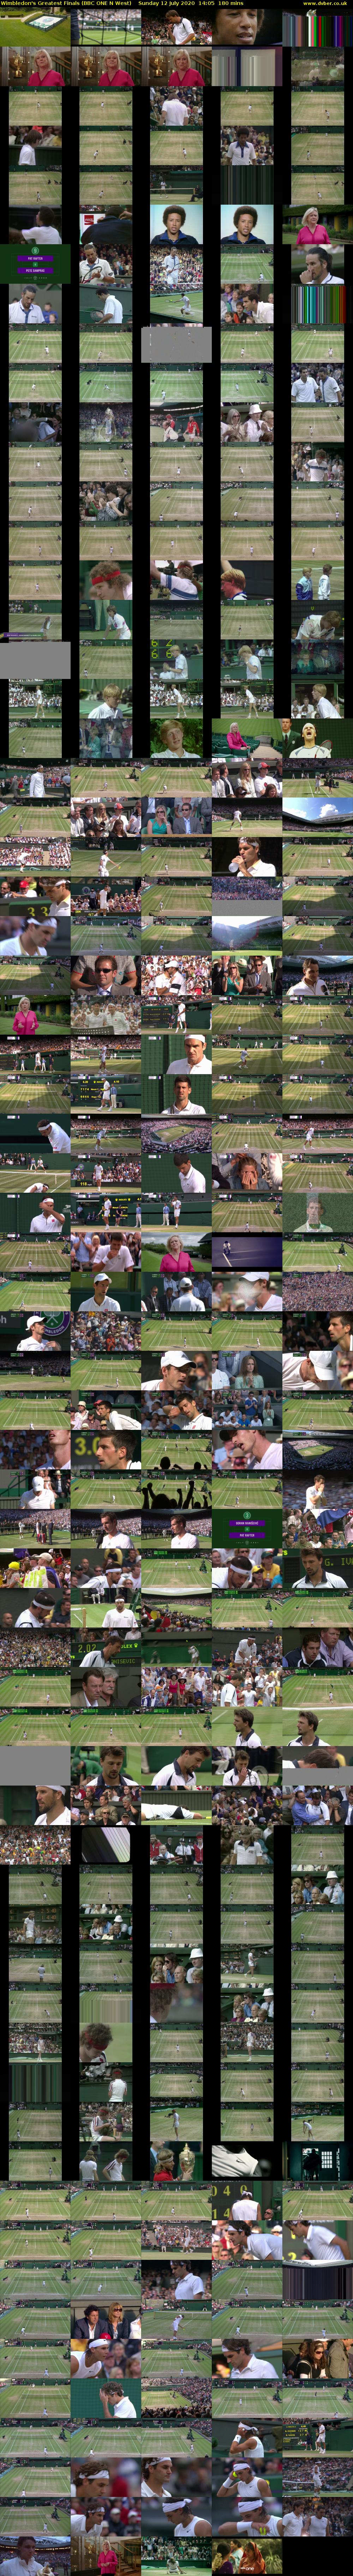 Wimbledon's Greatest Finals (BBC ONE N West) Sunday 12 July 2020 14:05 - 17:05